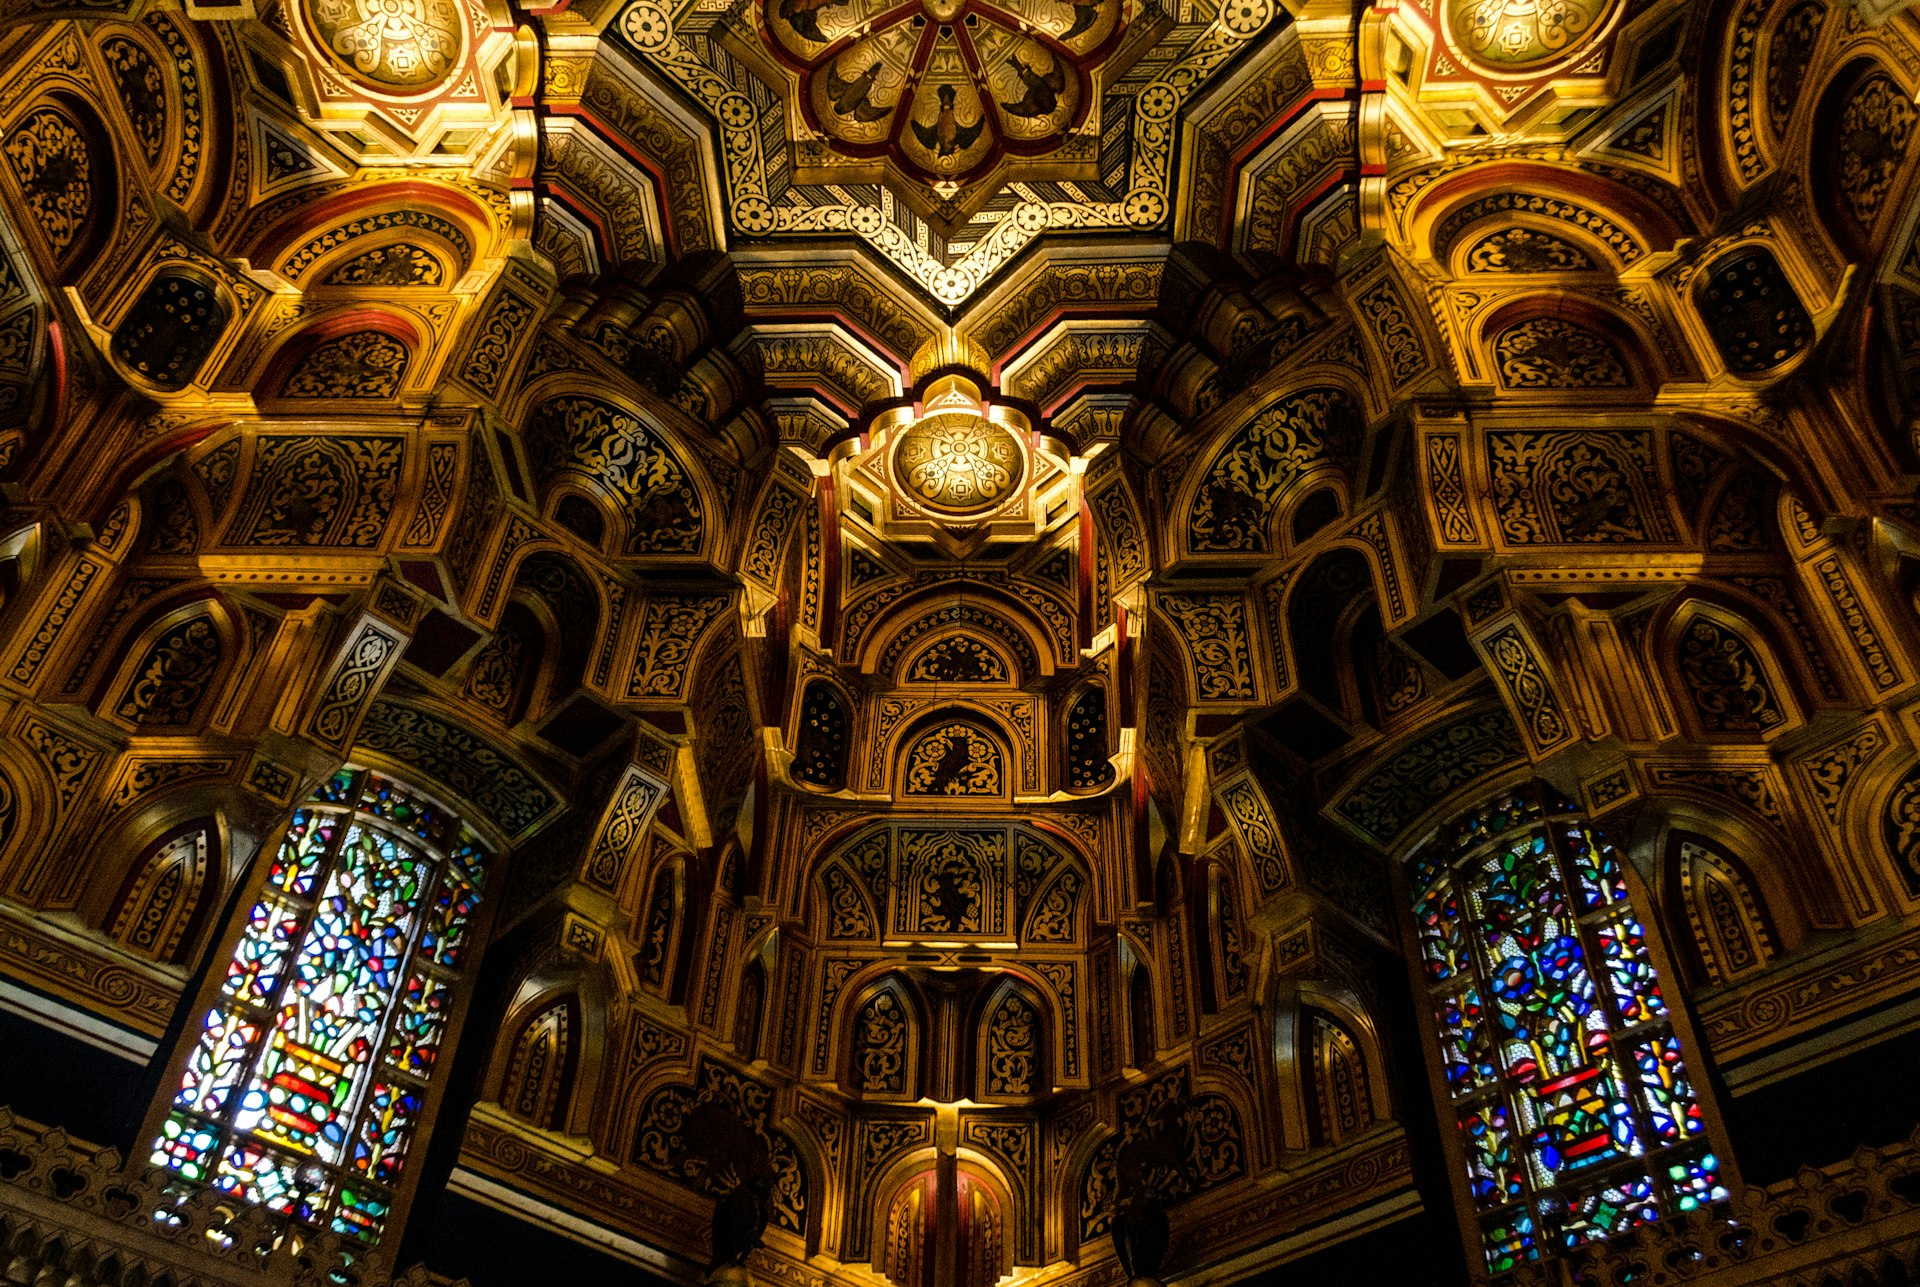 Ornate interior of Cardiff Castle, Wales